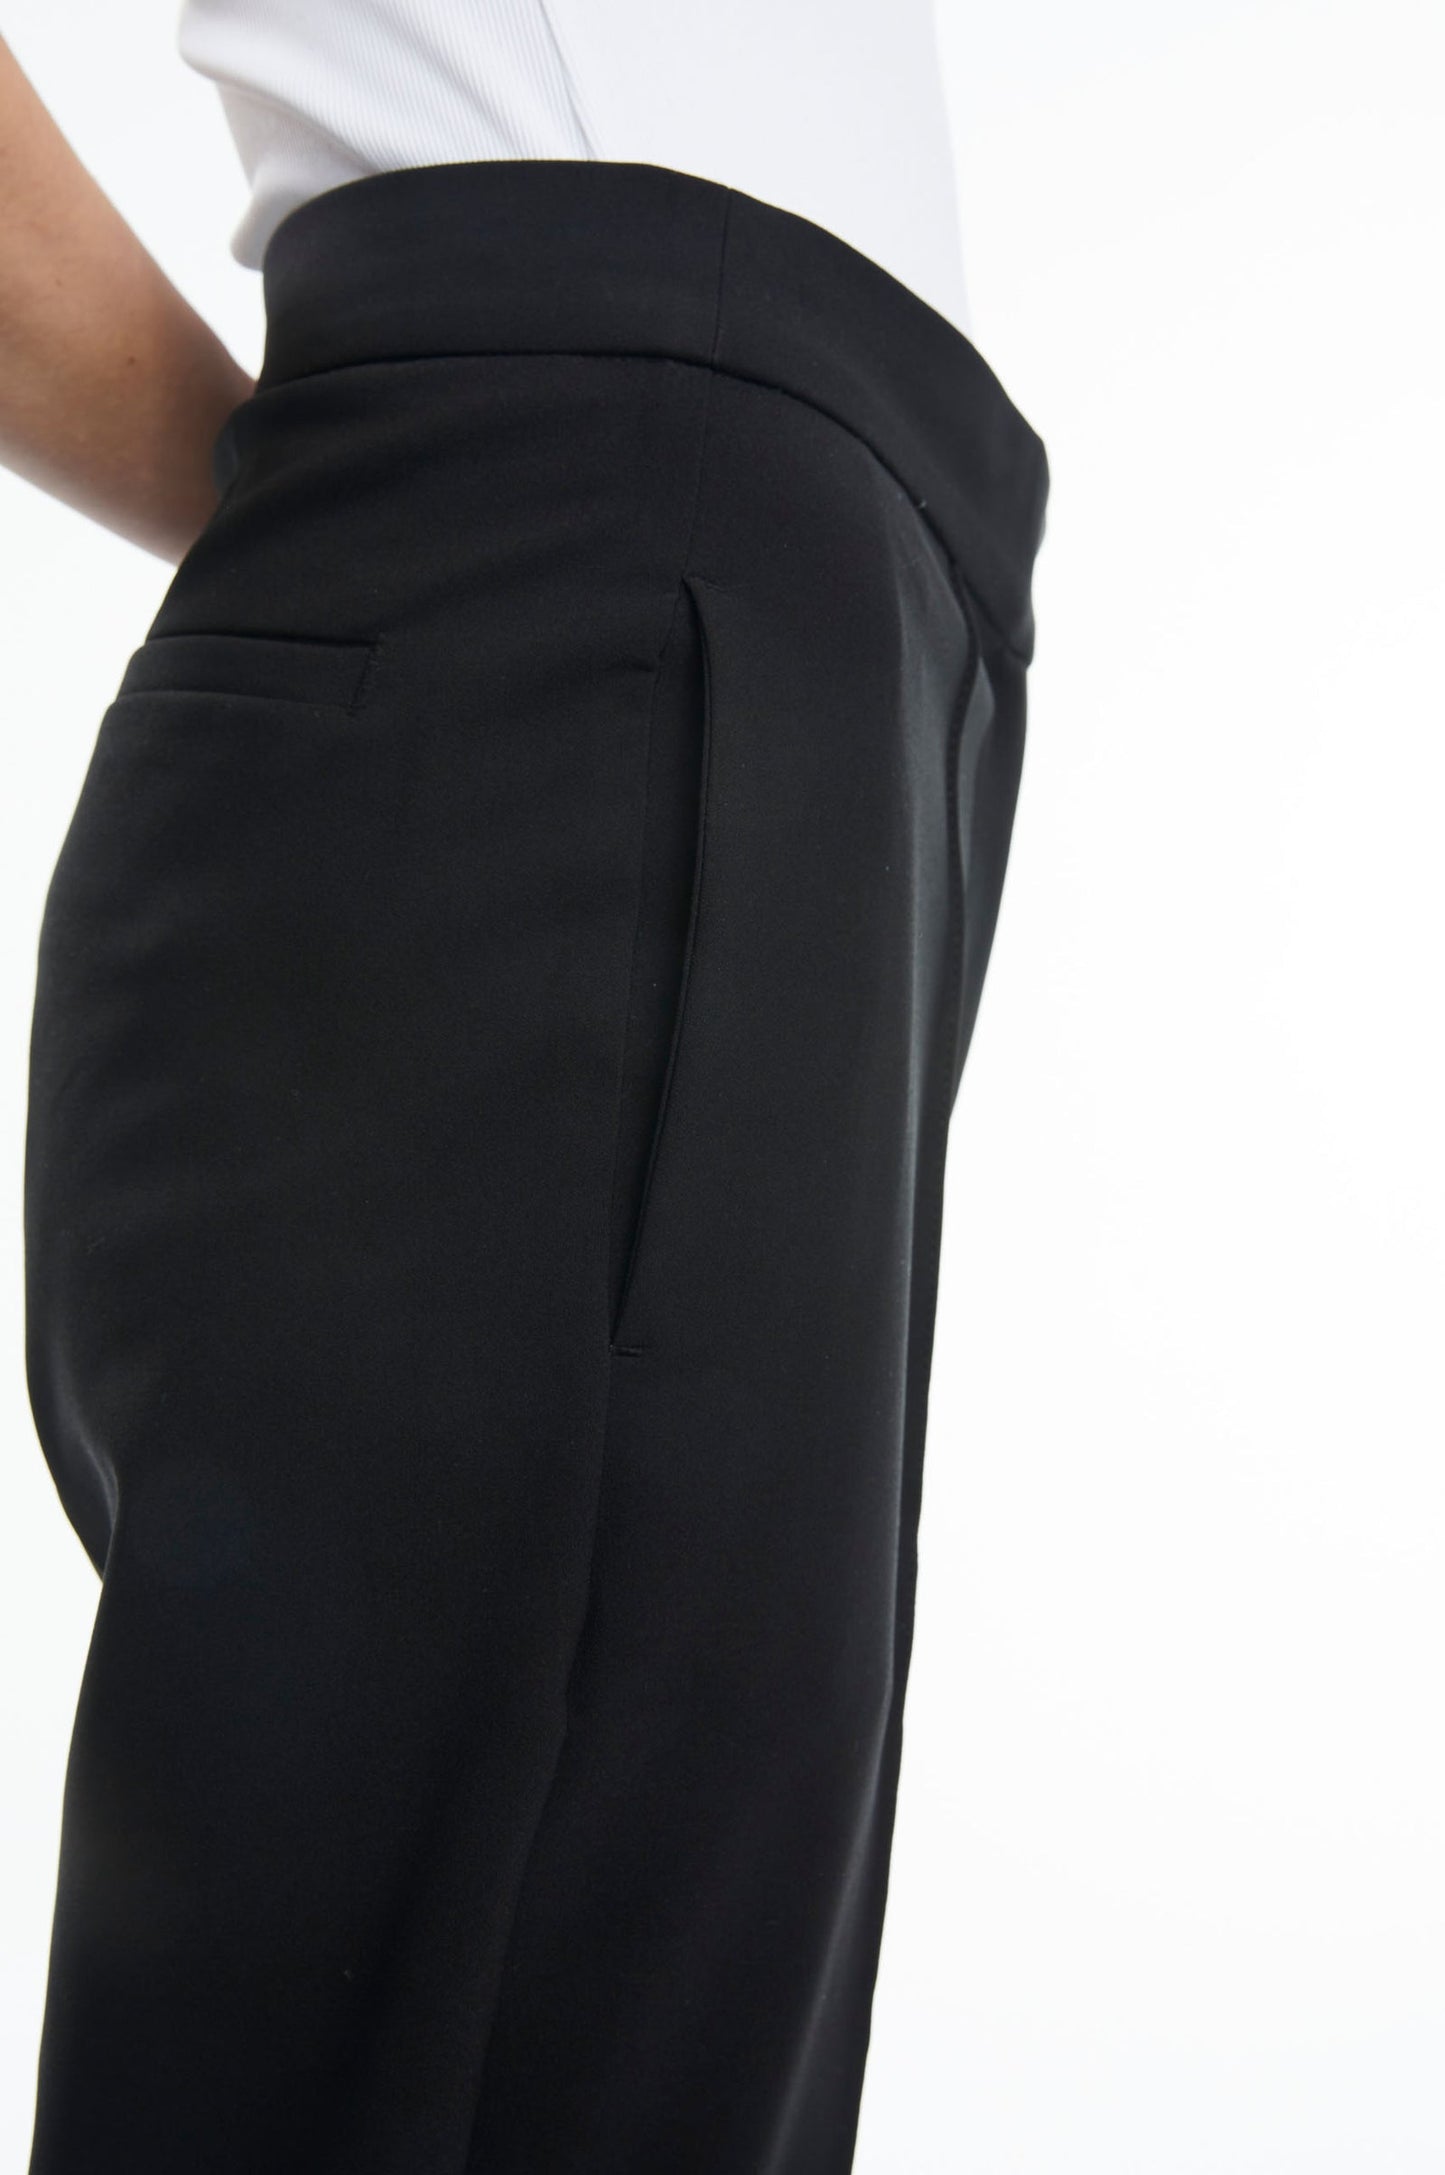 Oval Square Luxury Pants